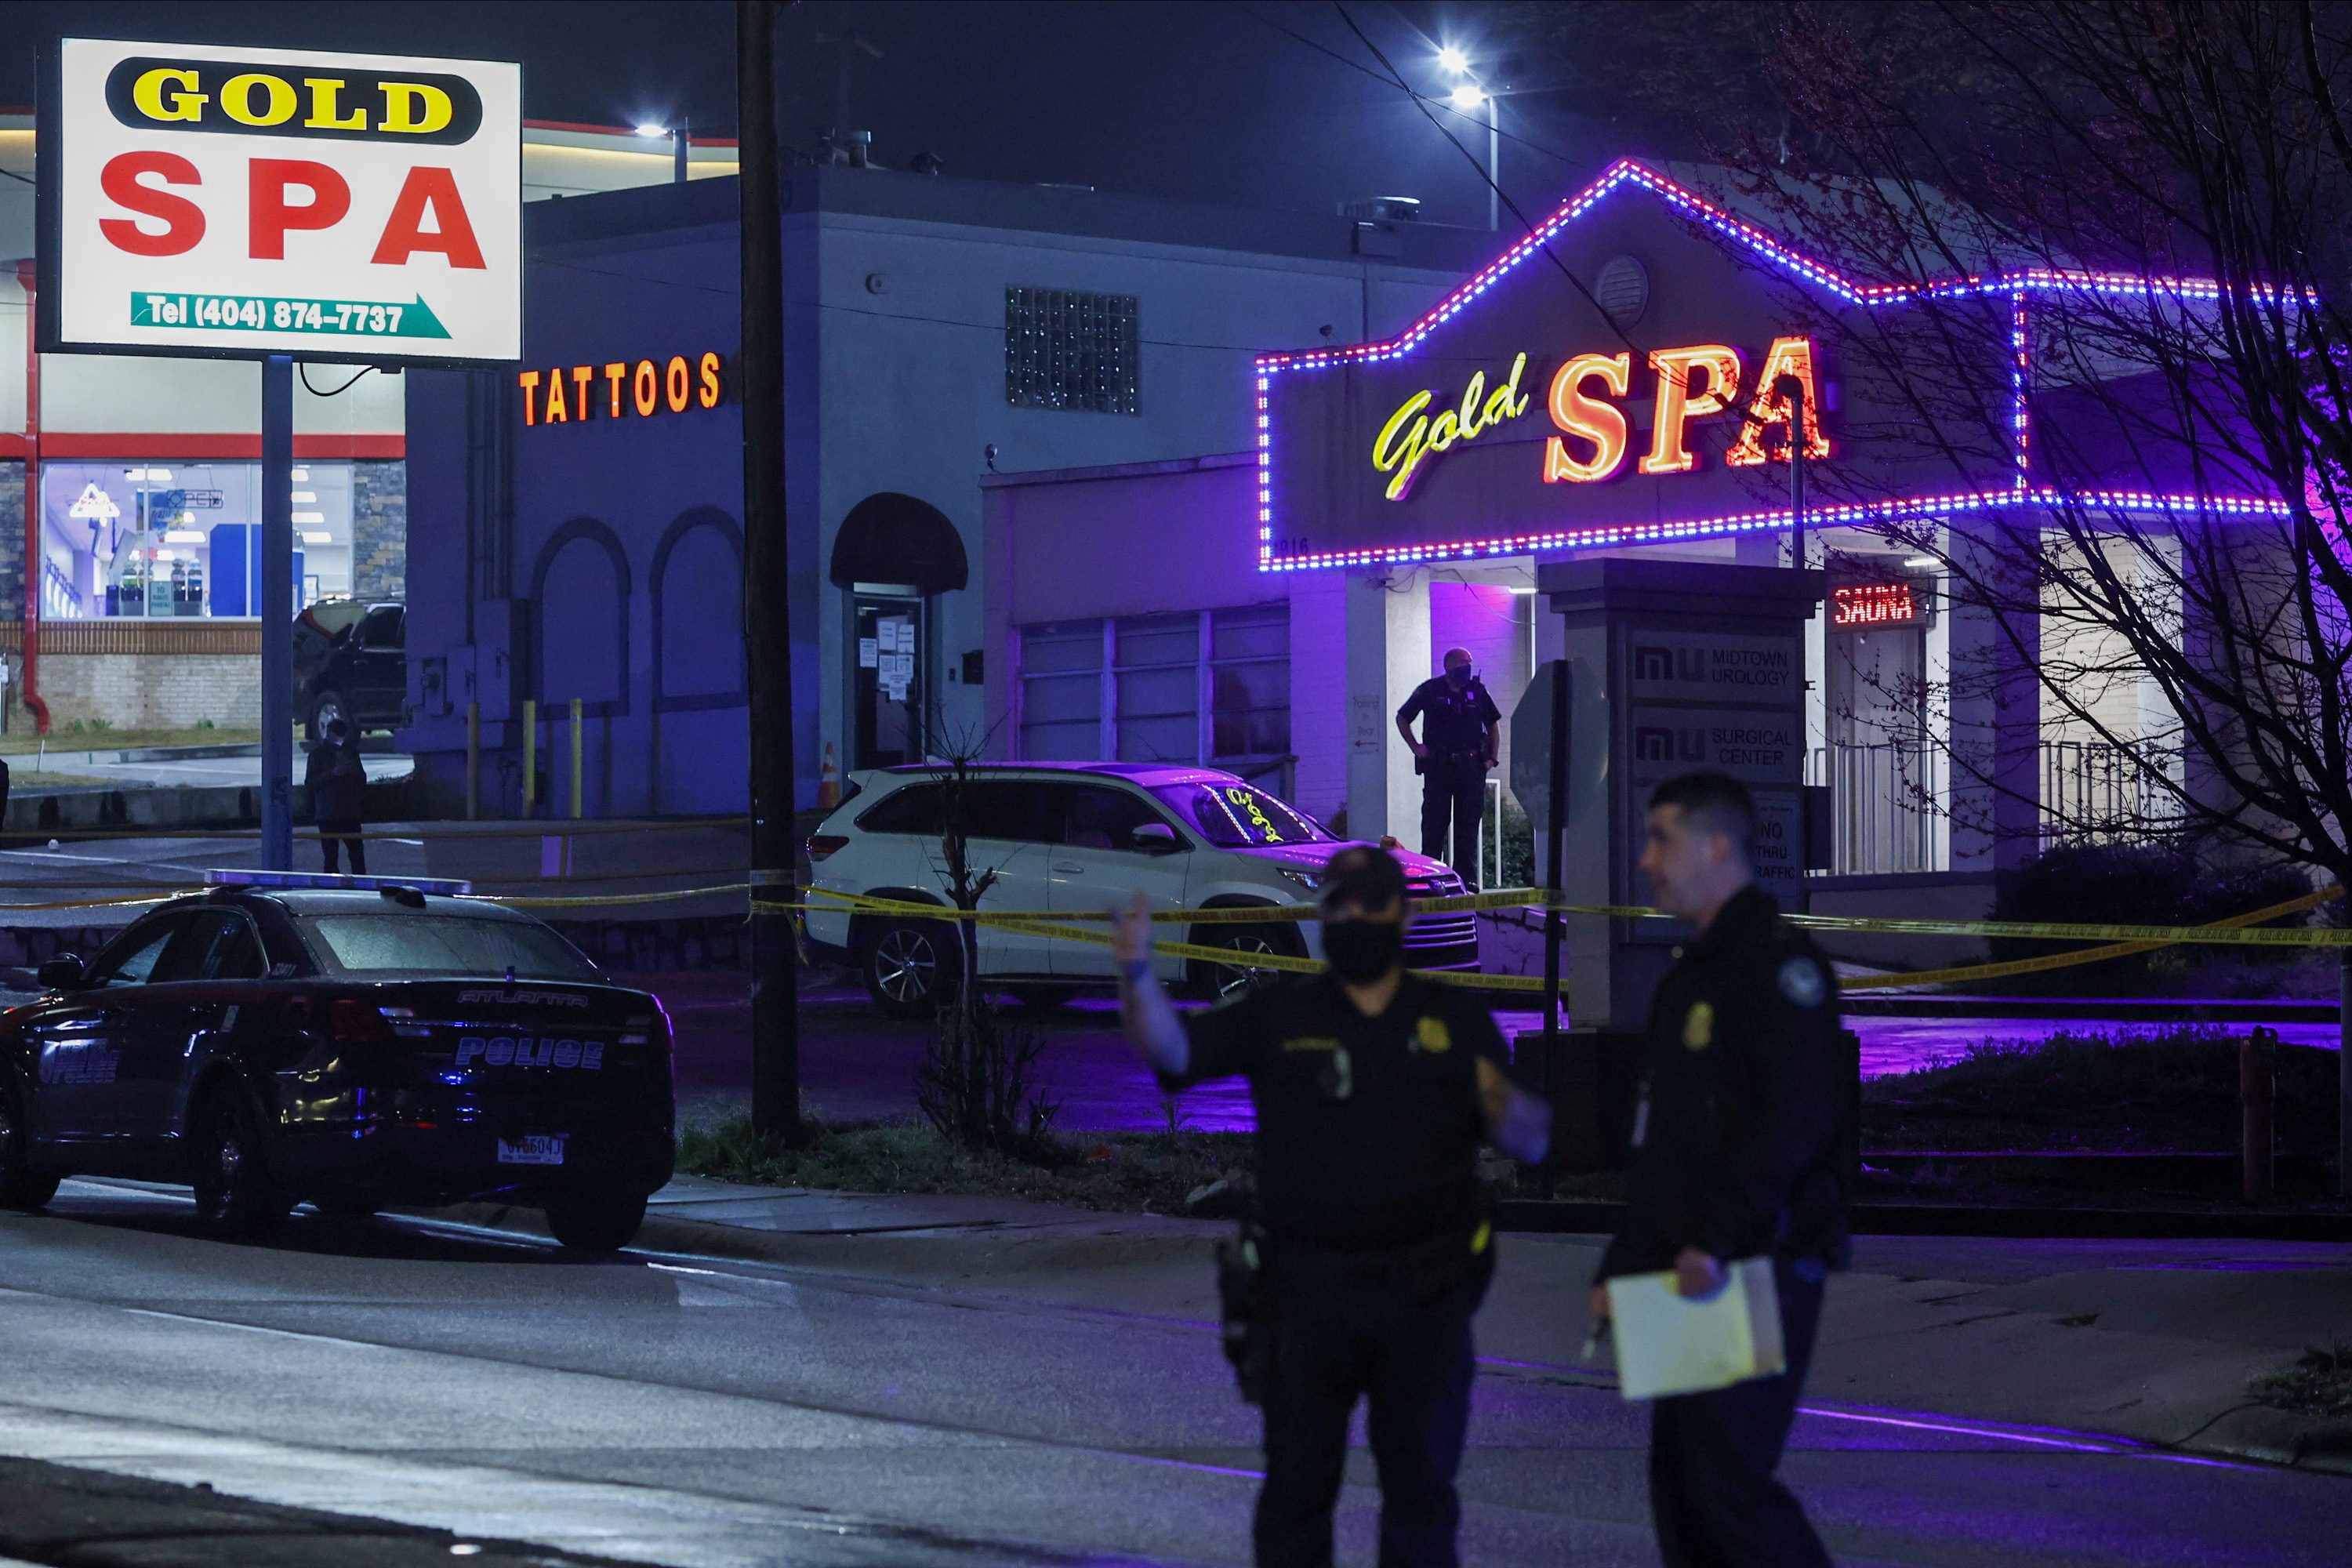 6 women of Asian descent among 8 killed in shootings at Atlanta day spas